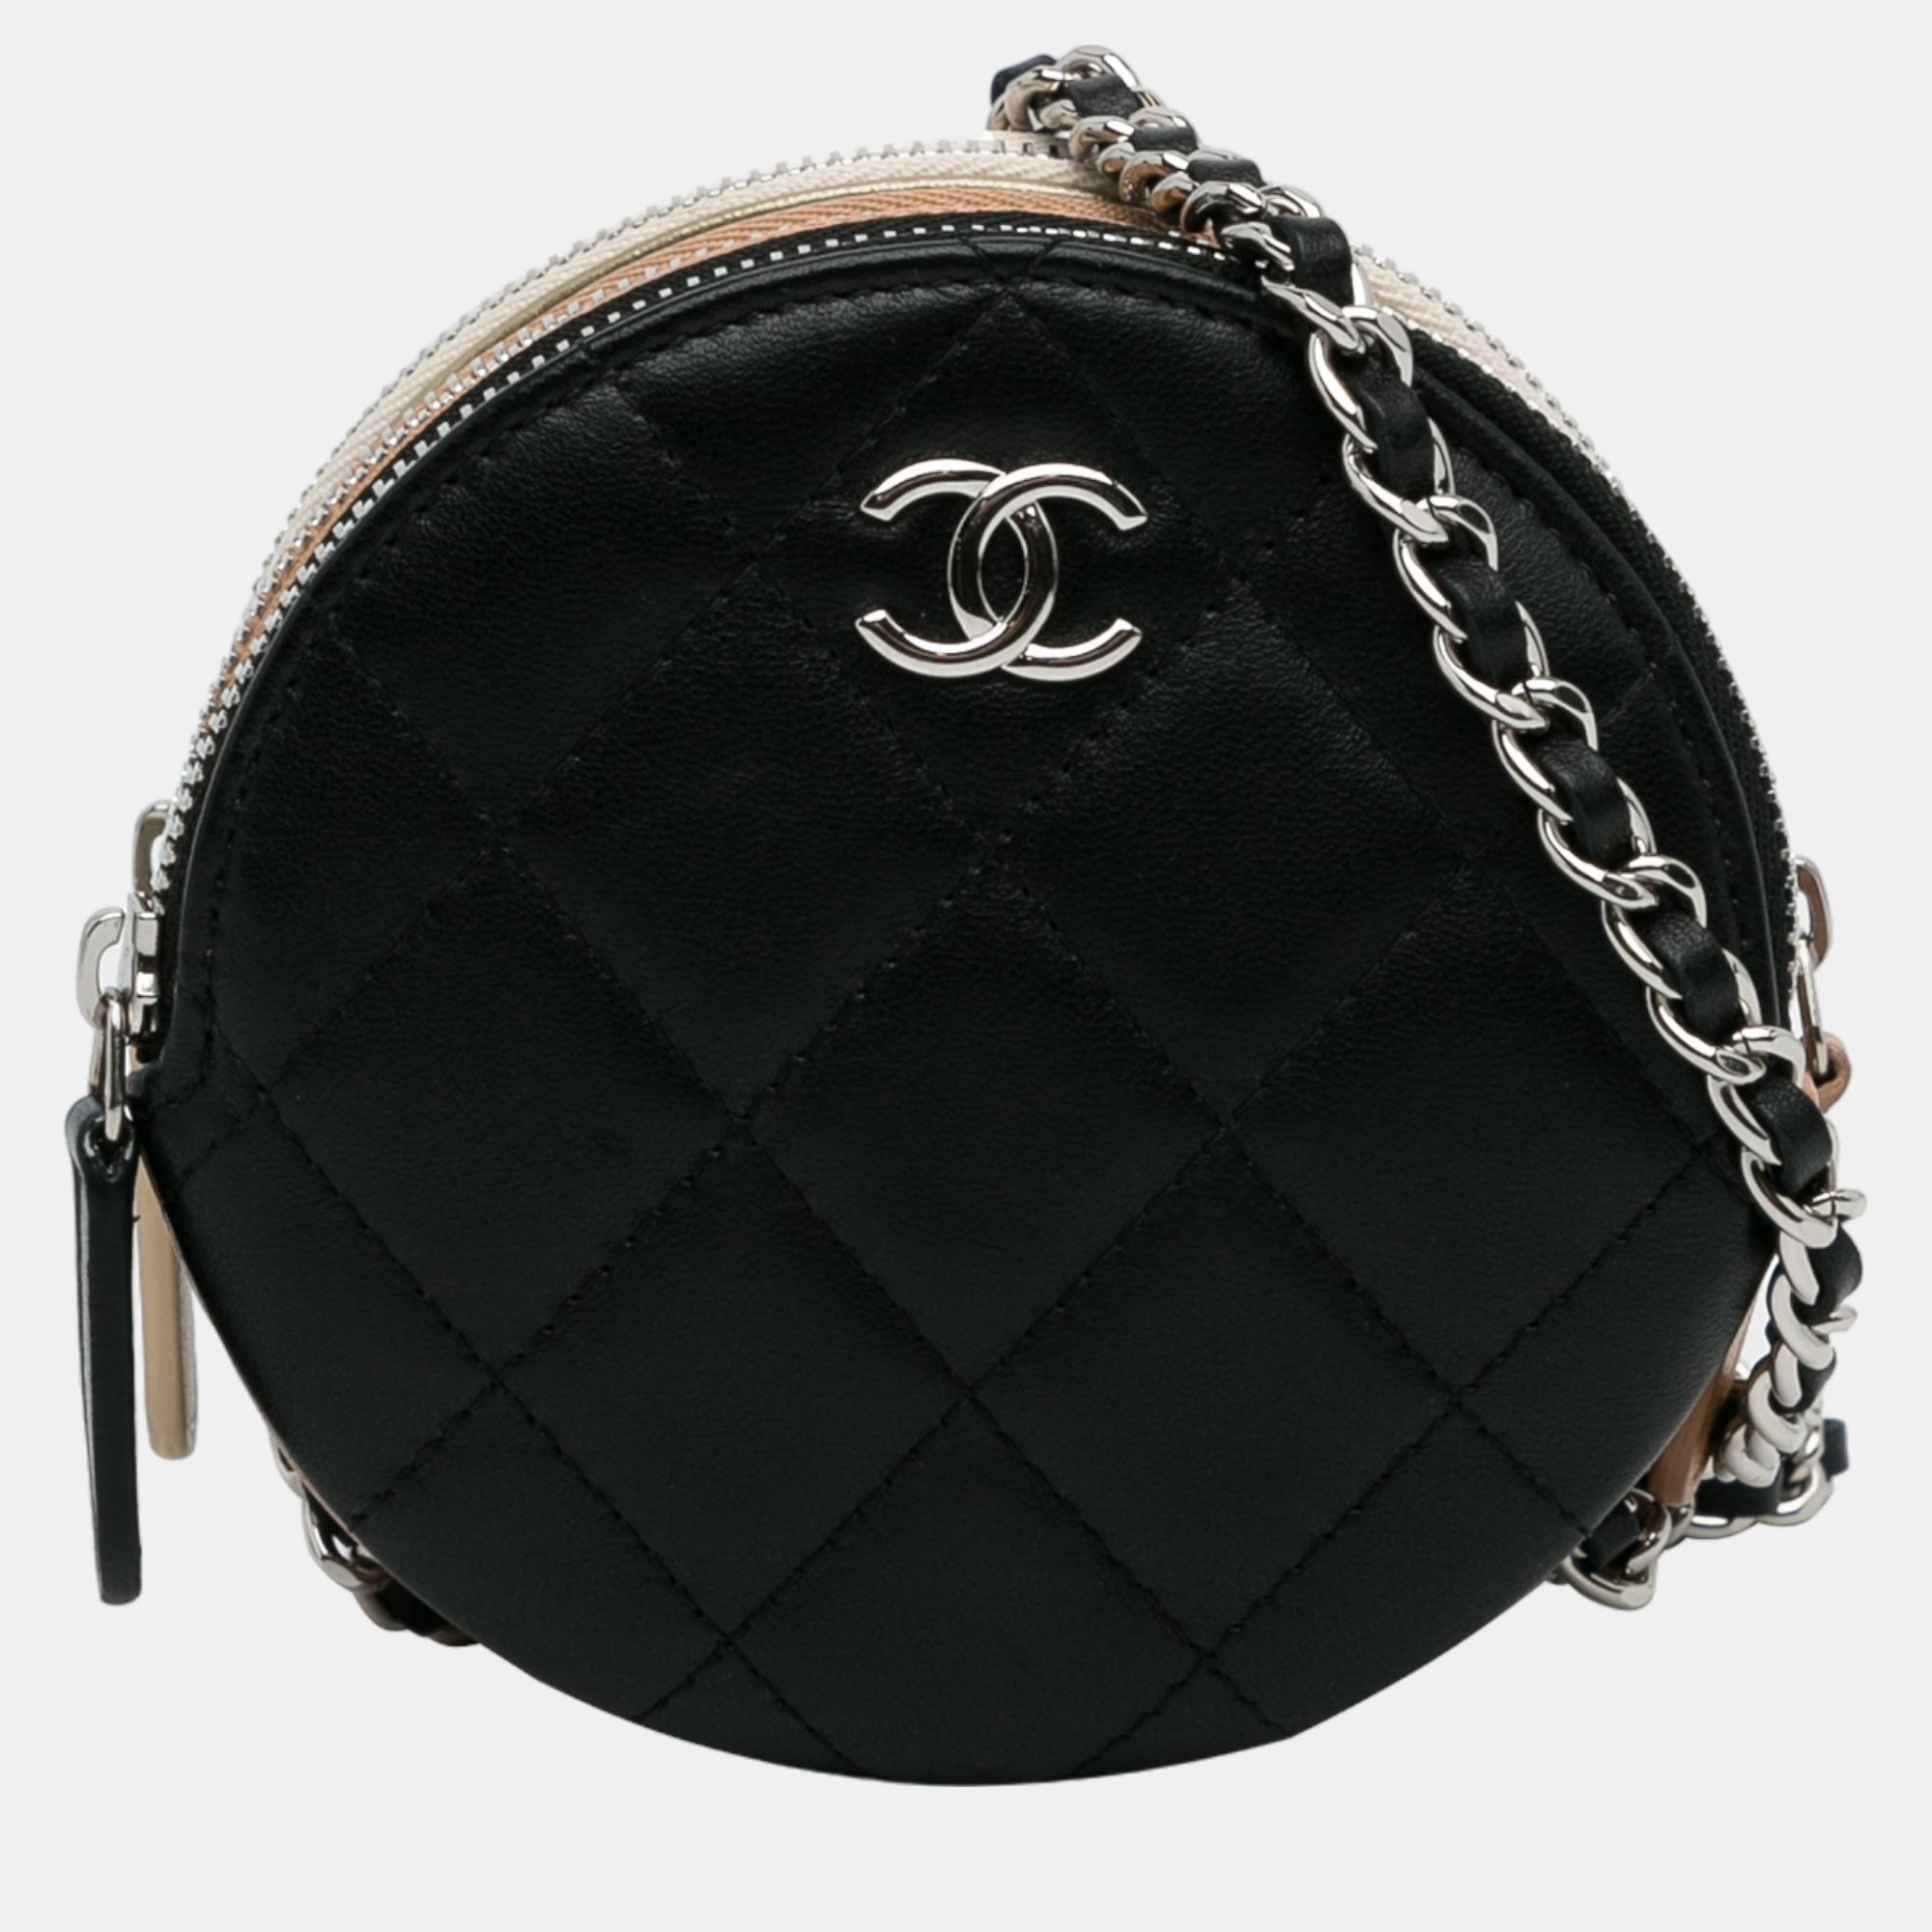 This crossbody bag features a quilted leather body a leather woven chain strap and three top zip closures.